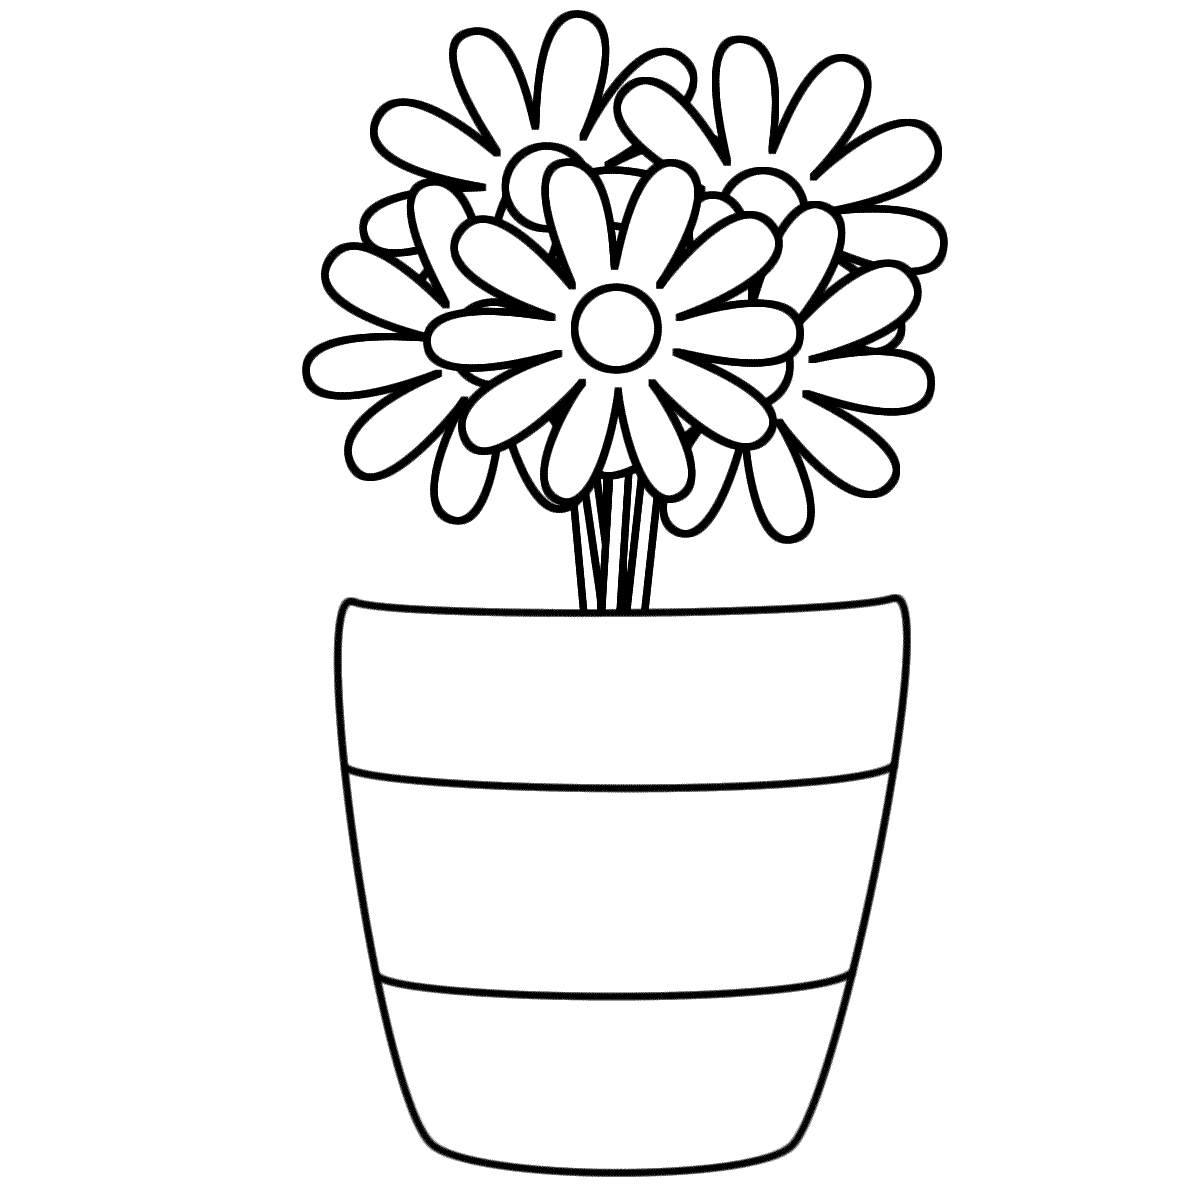 Vase With Flowers Image Coloring Page